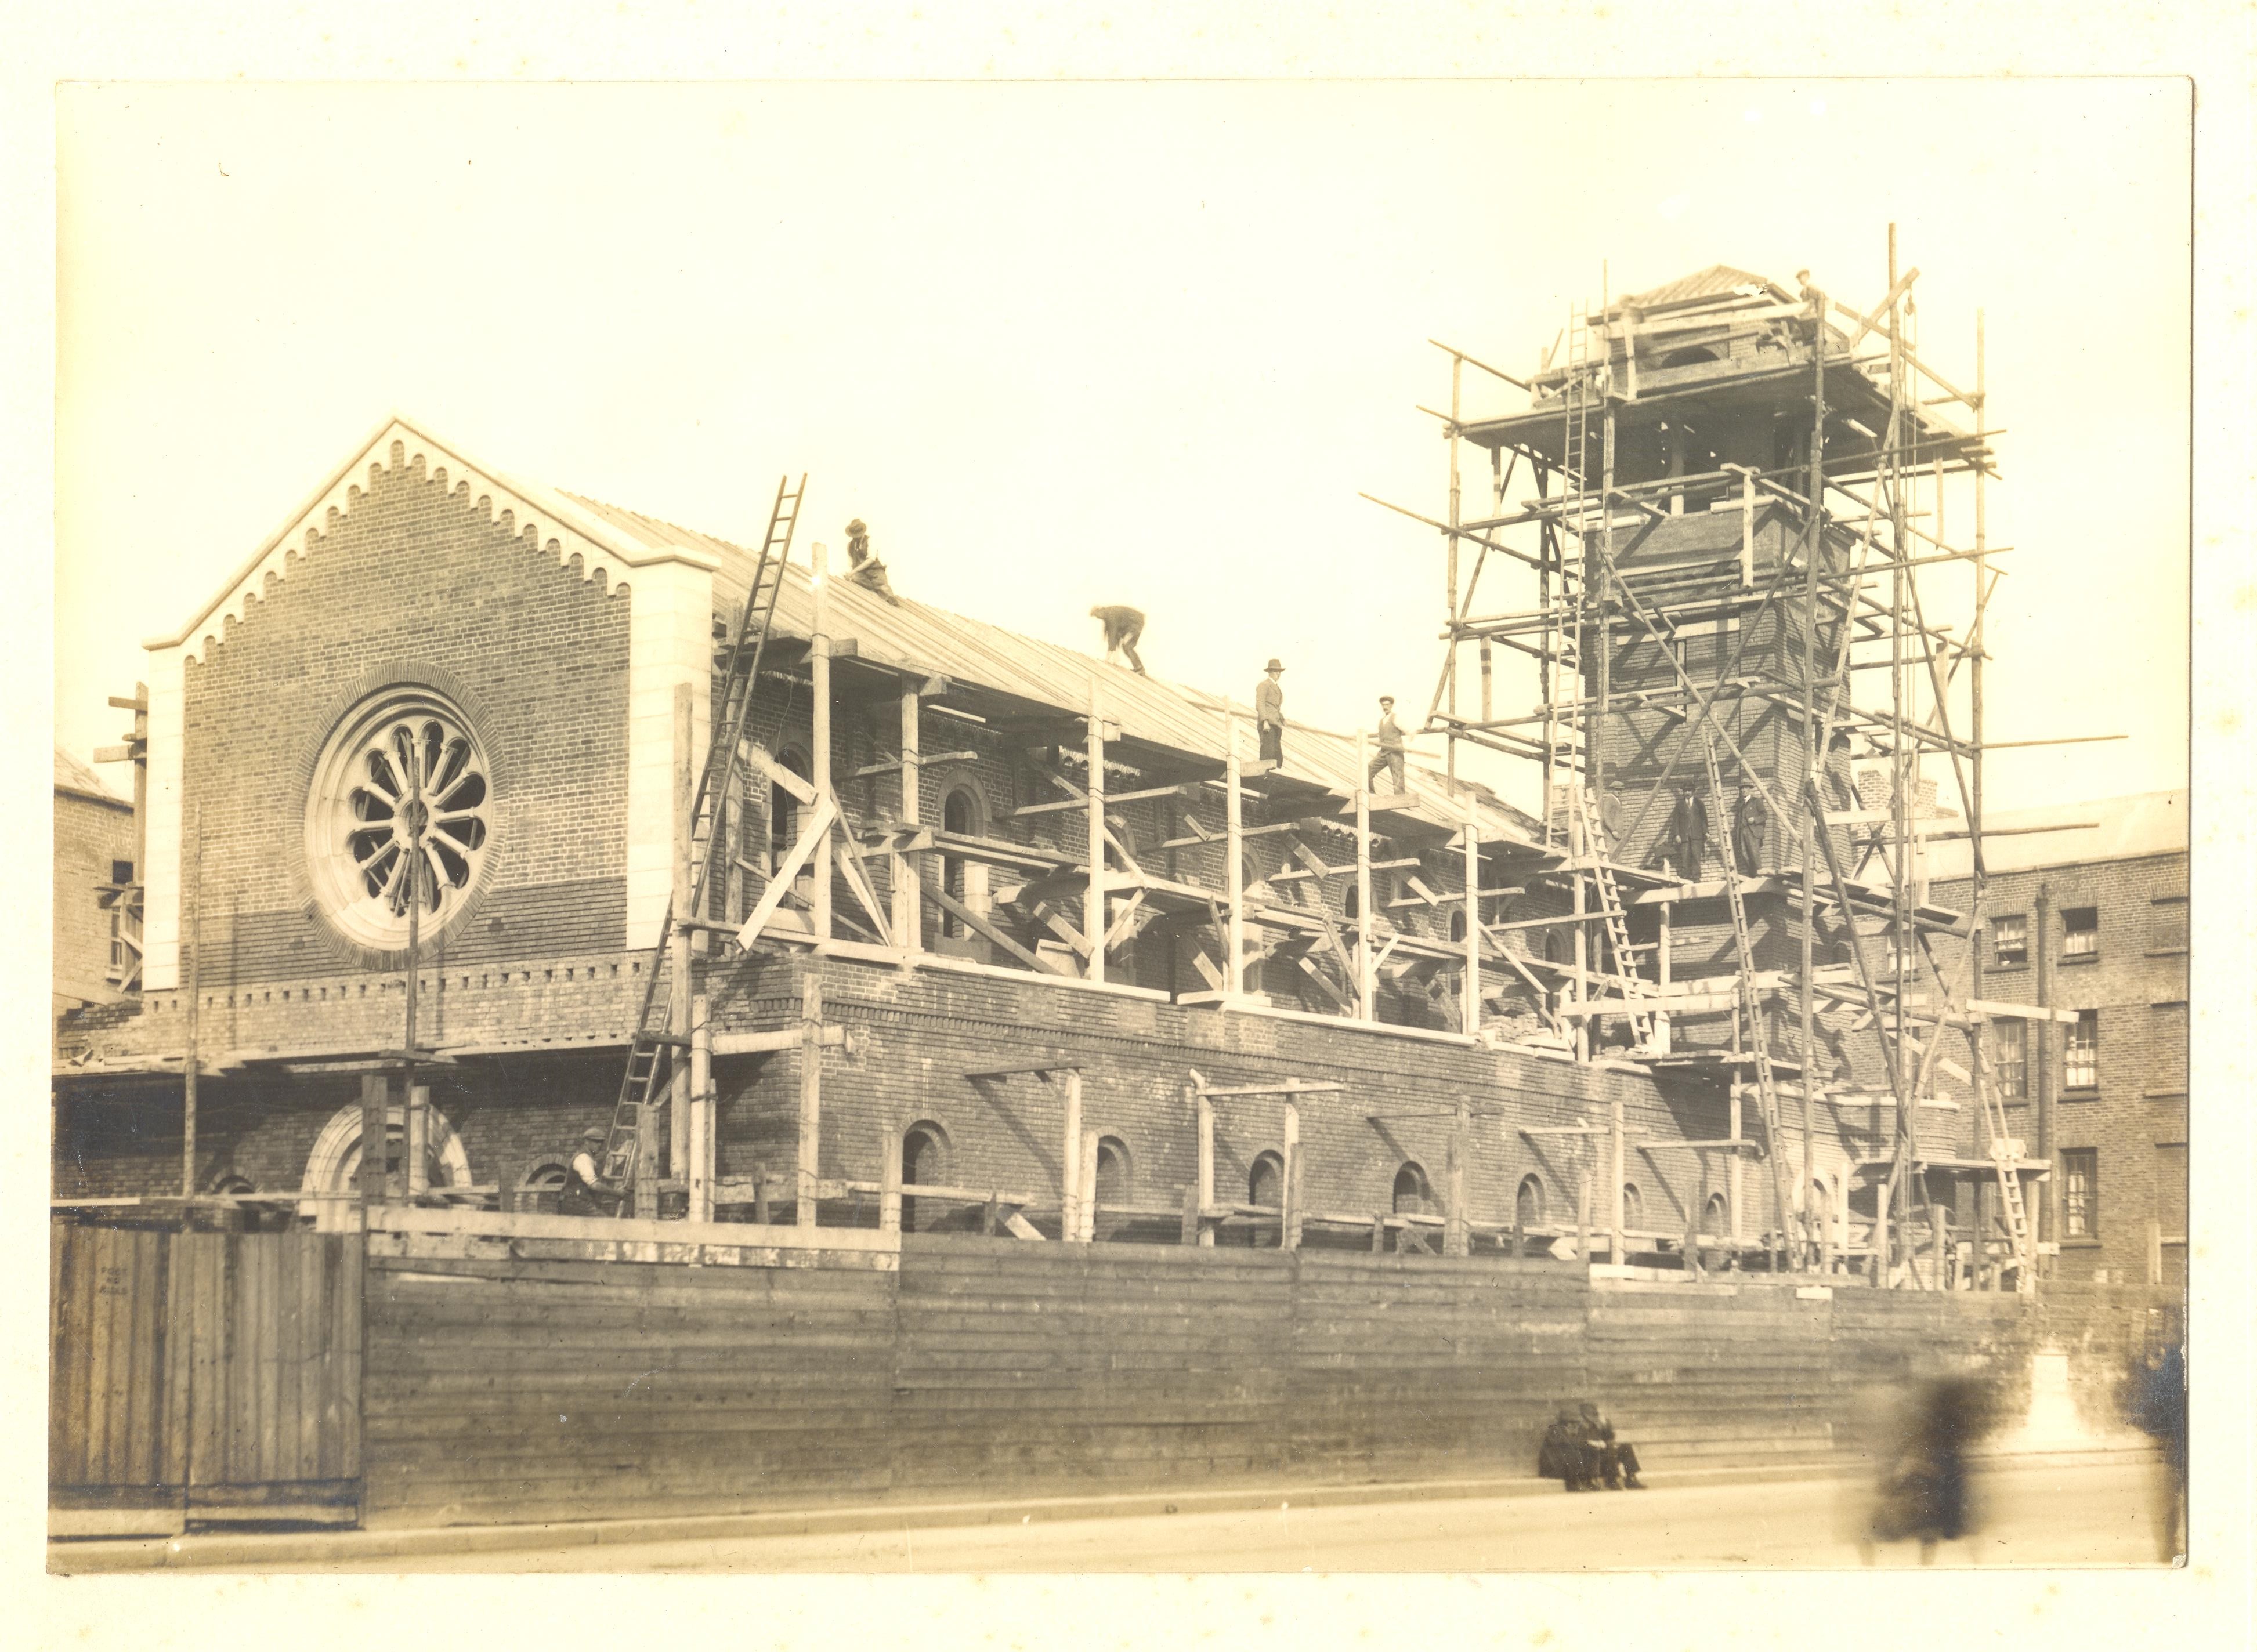 An undated photograph of the new church in construction, likely taken between the end of 1930 and late 1931. RCB Library P.80.29.2